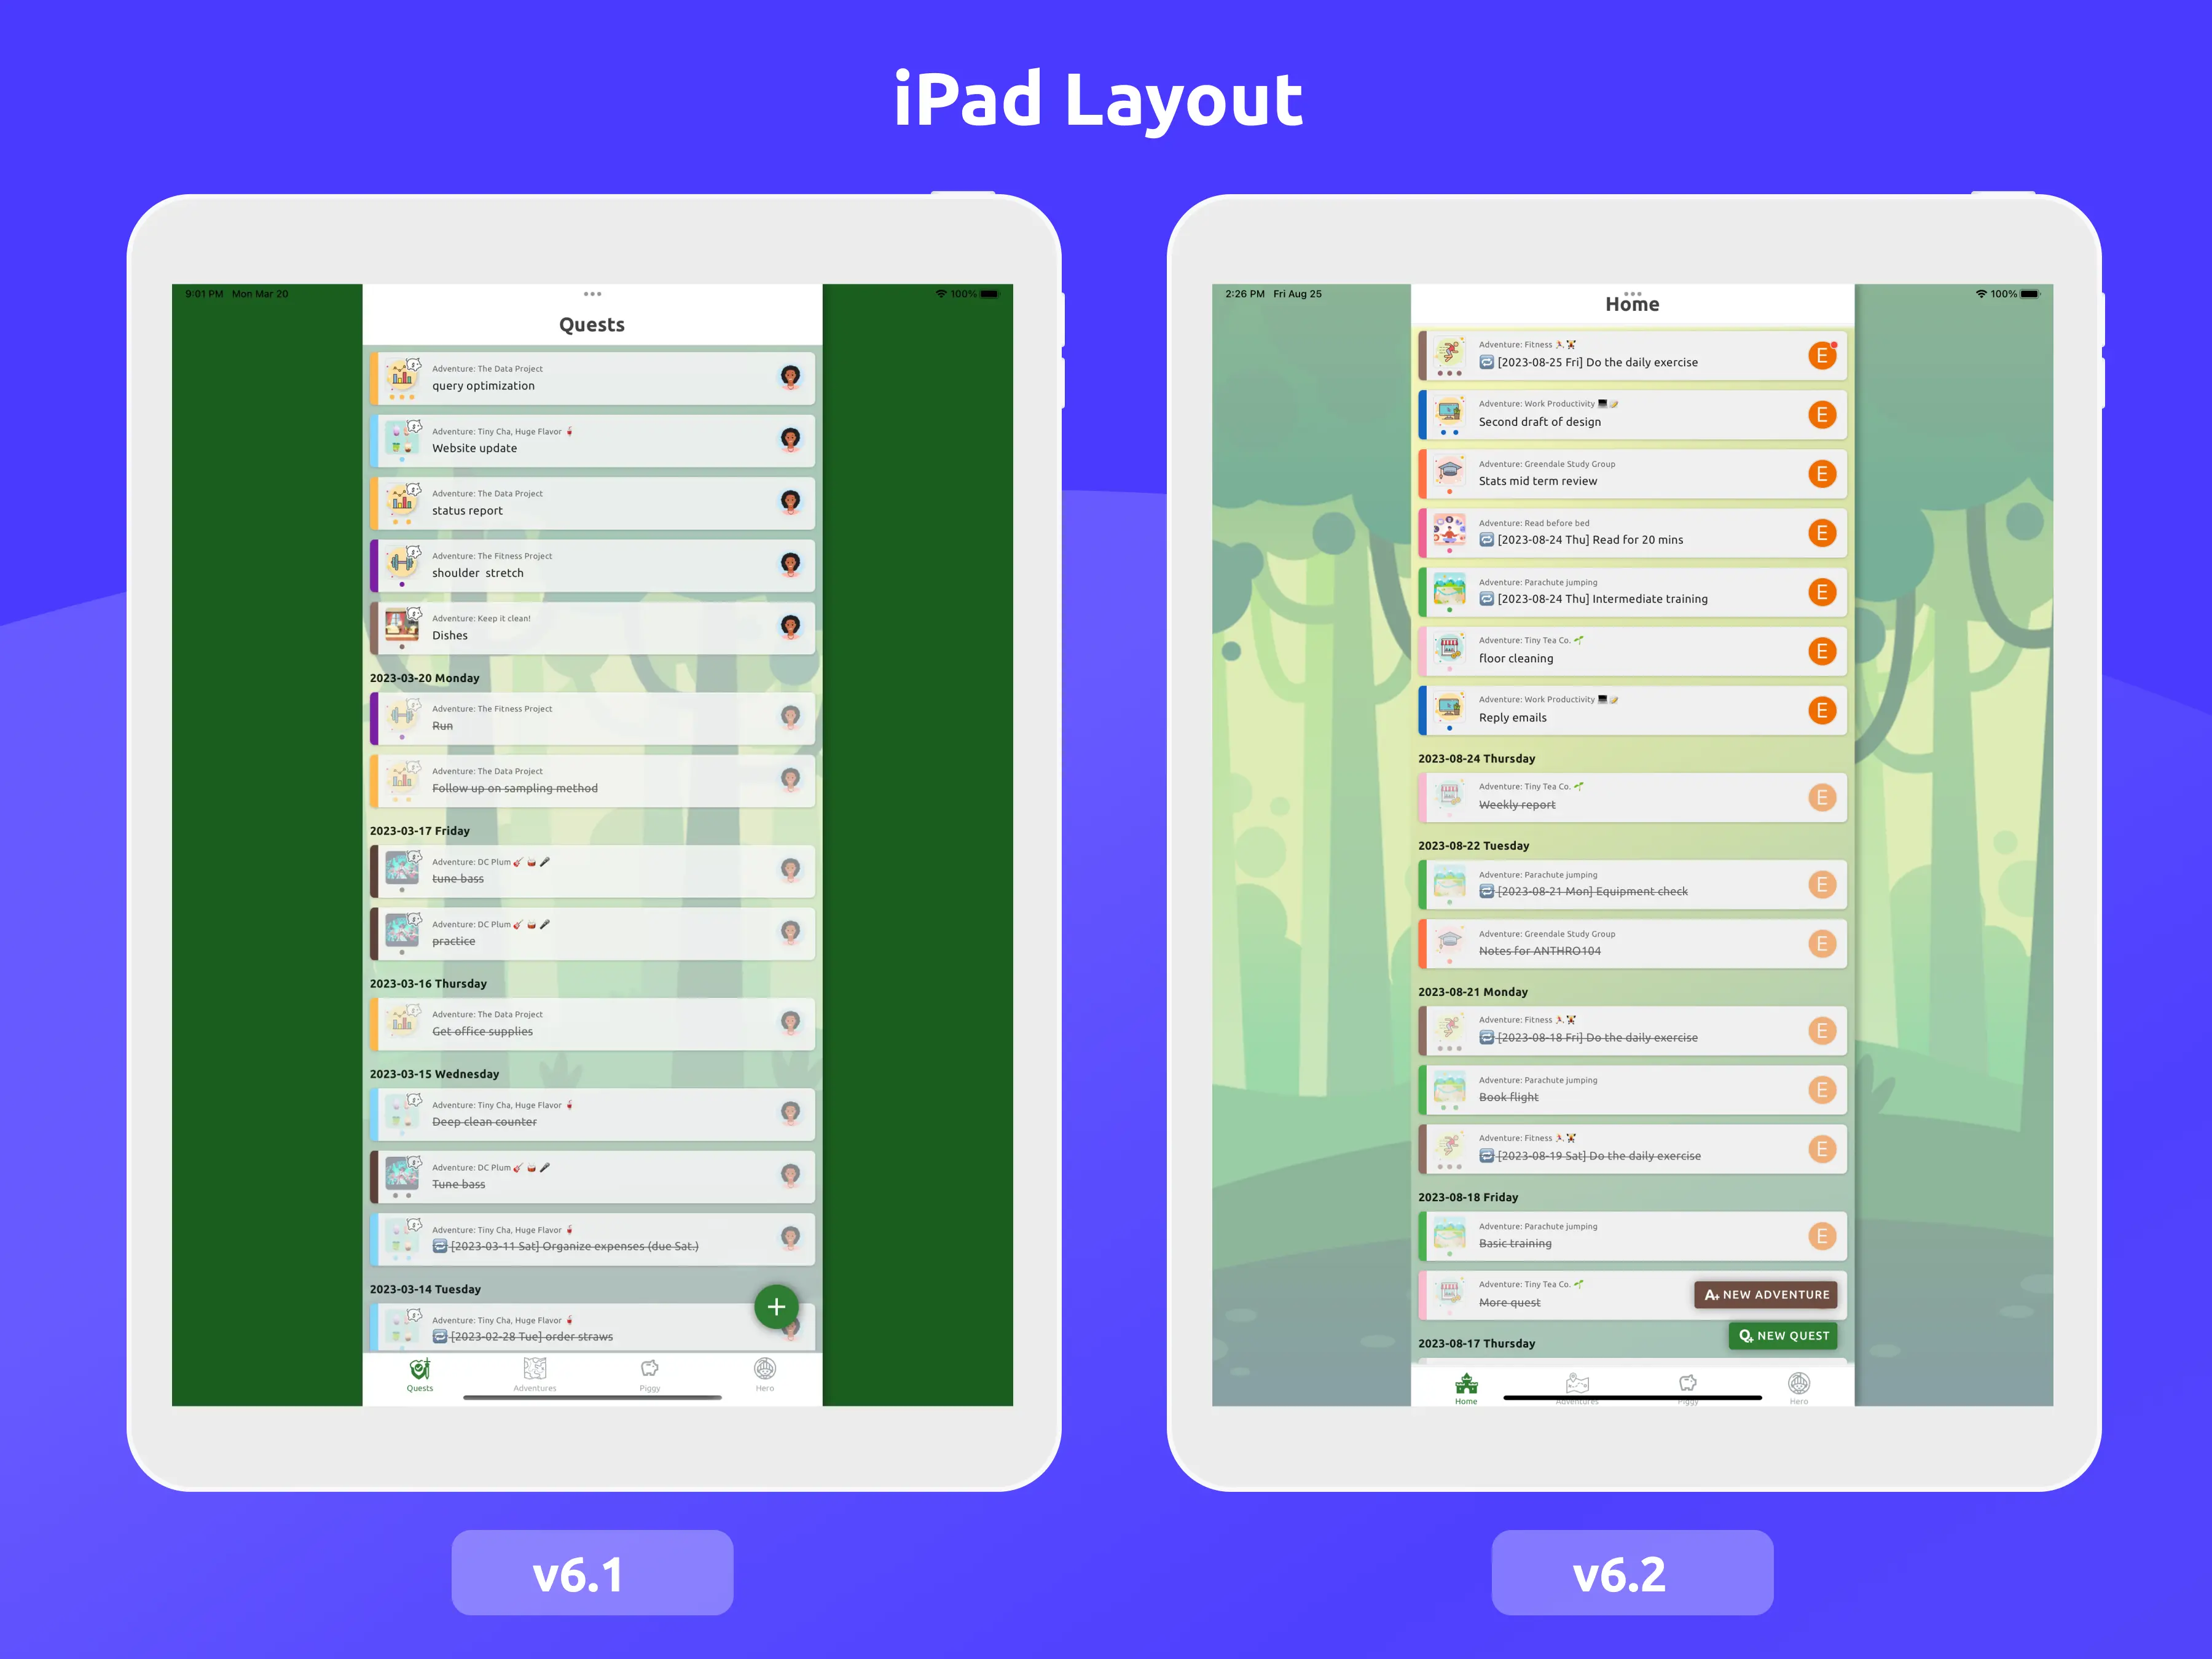 v6.2 UI comparison with v6.1 for iPad layout